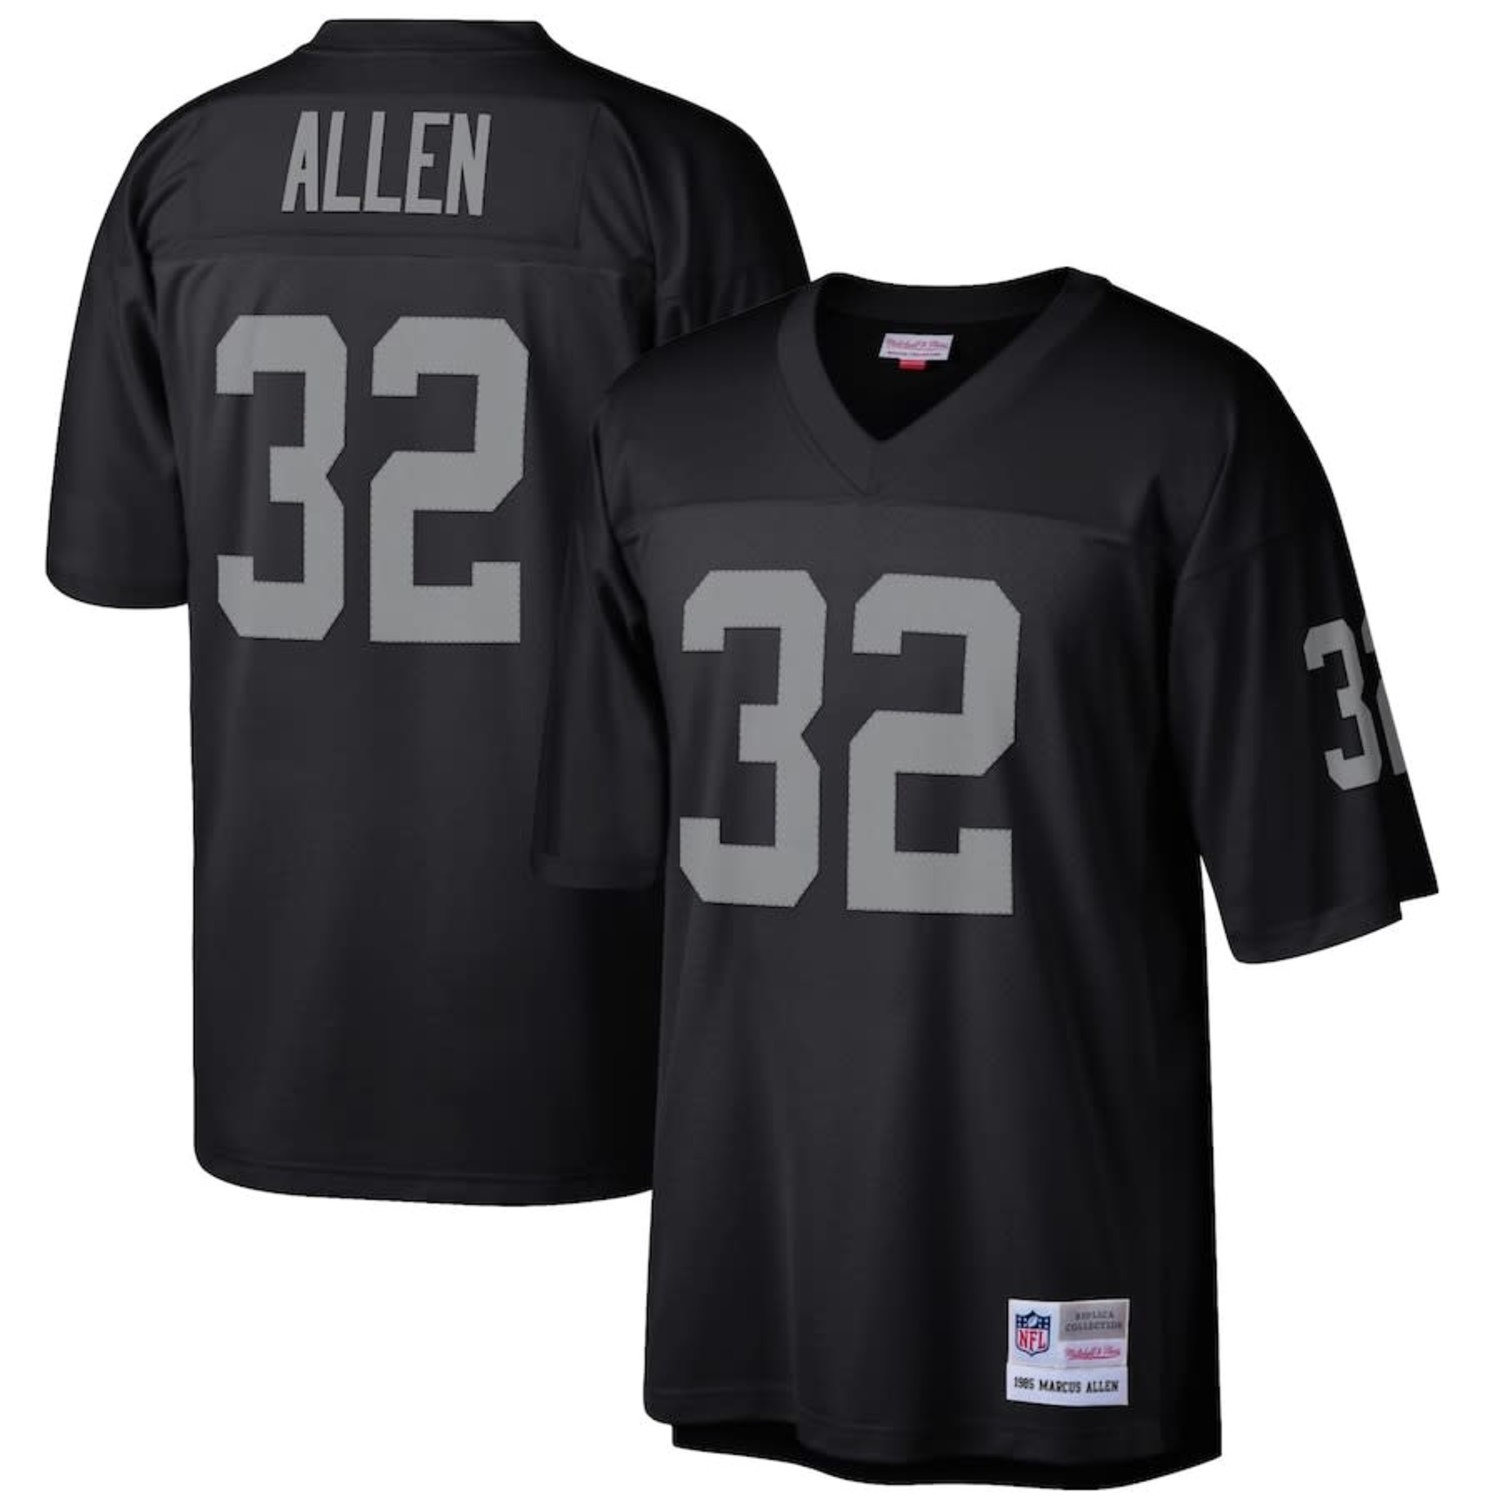 Raiders jersey number 32